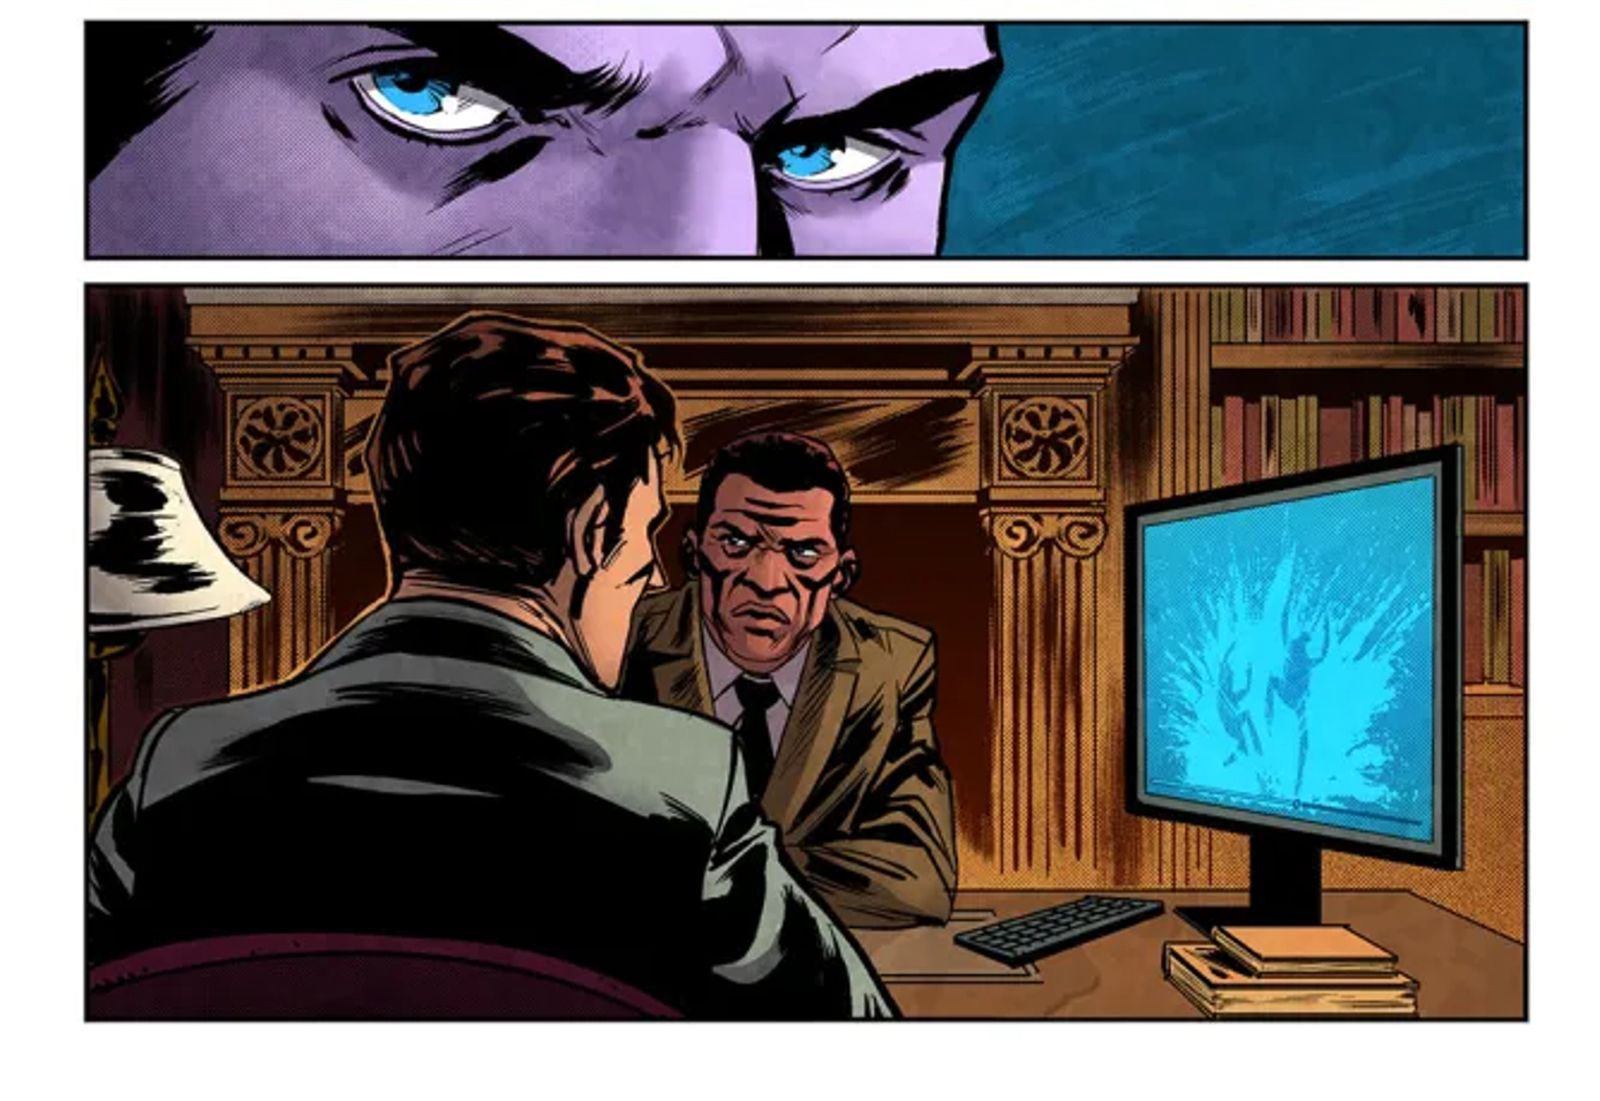 panels from Garth Ennis' new 007 series, featuring mysterious weapon